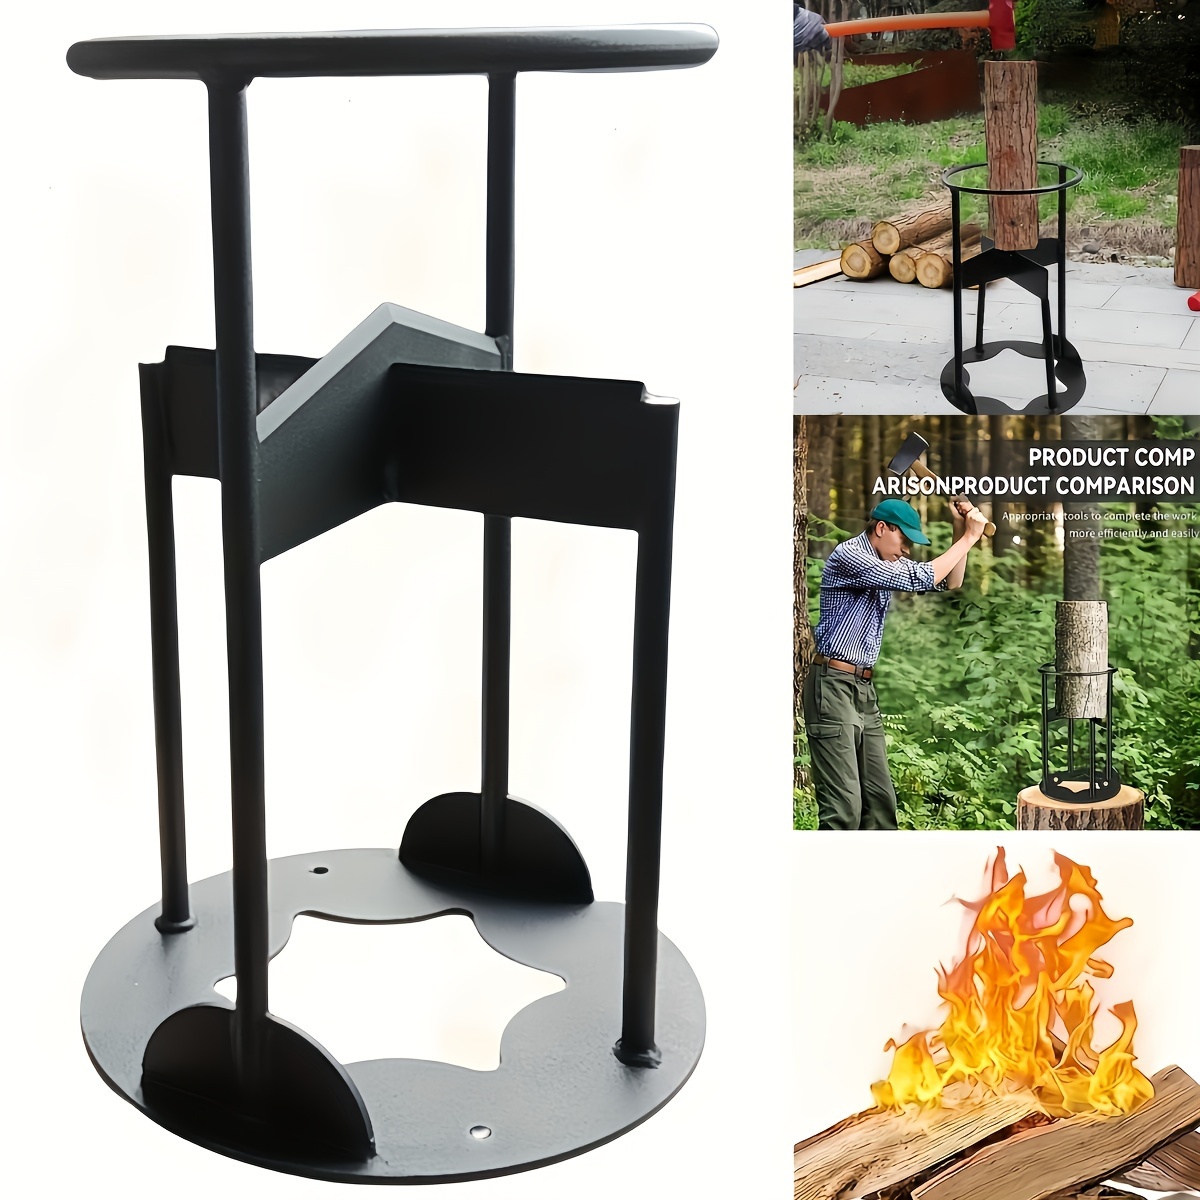 11 DIA Portable Firewood Kindling Splitter Stand with Cover